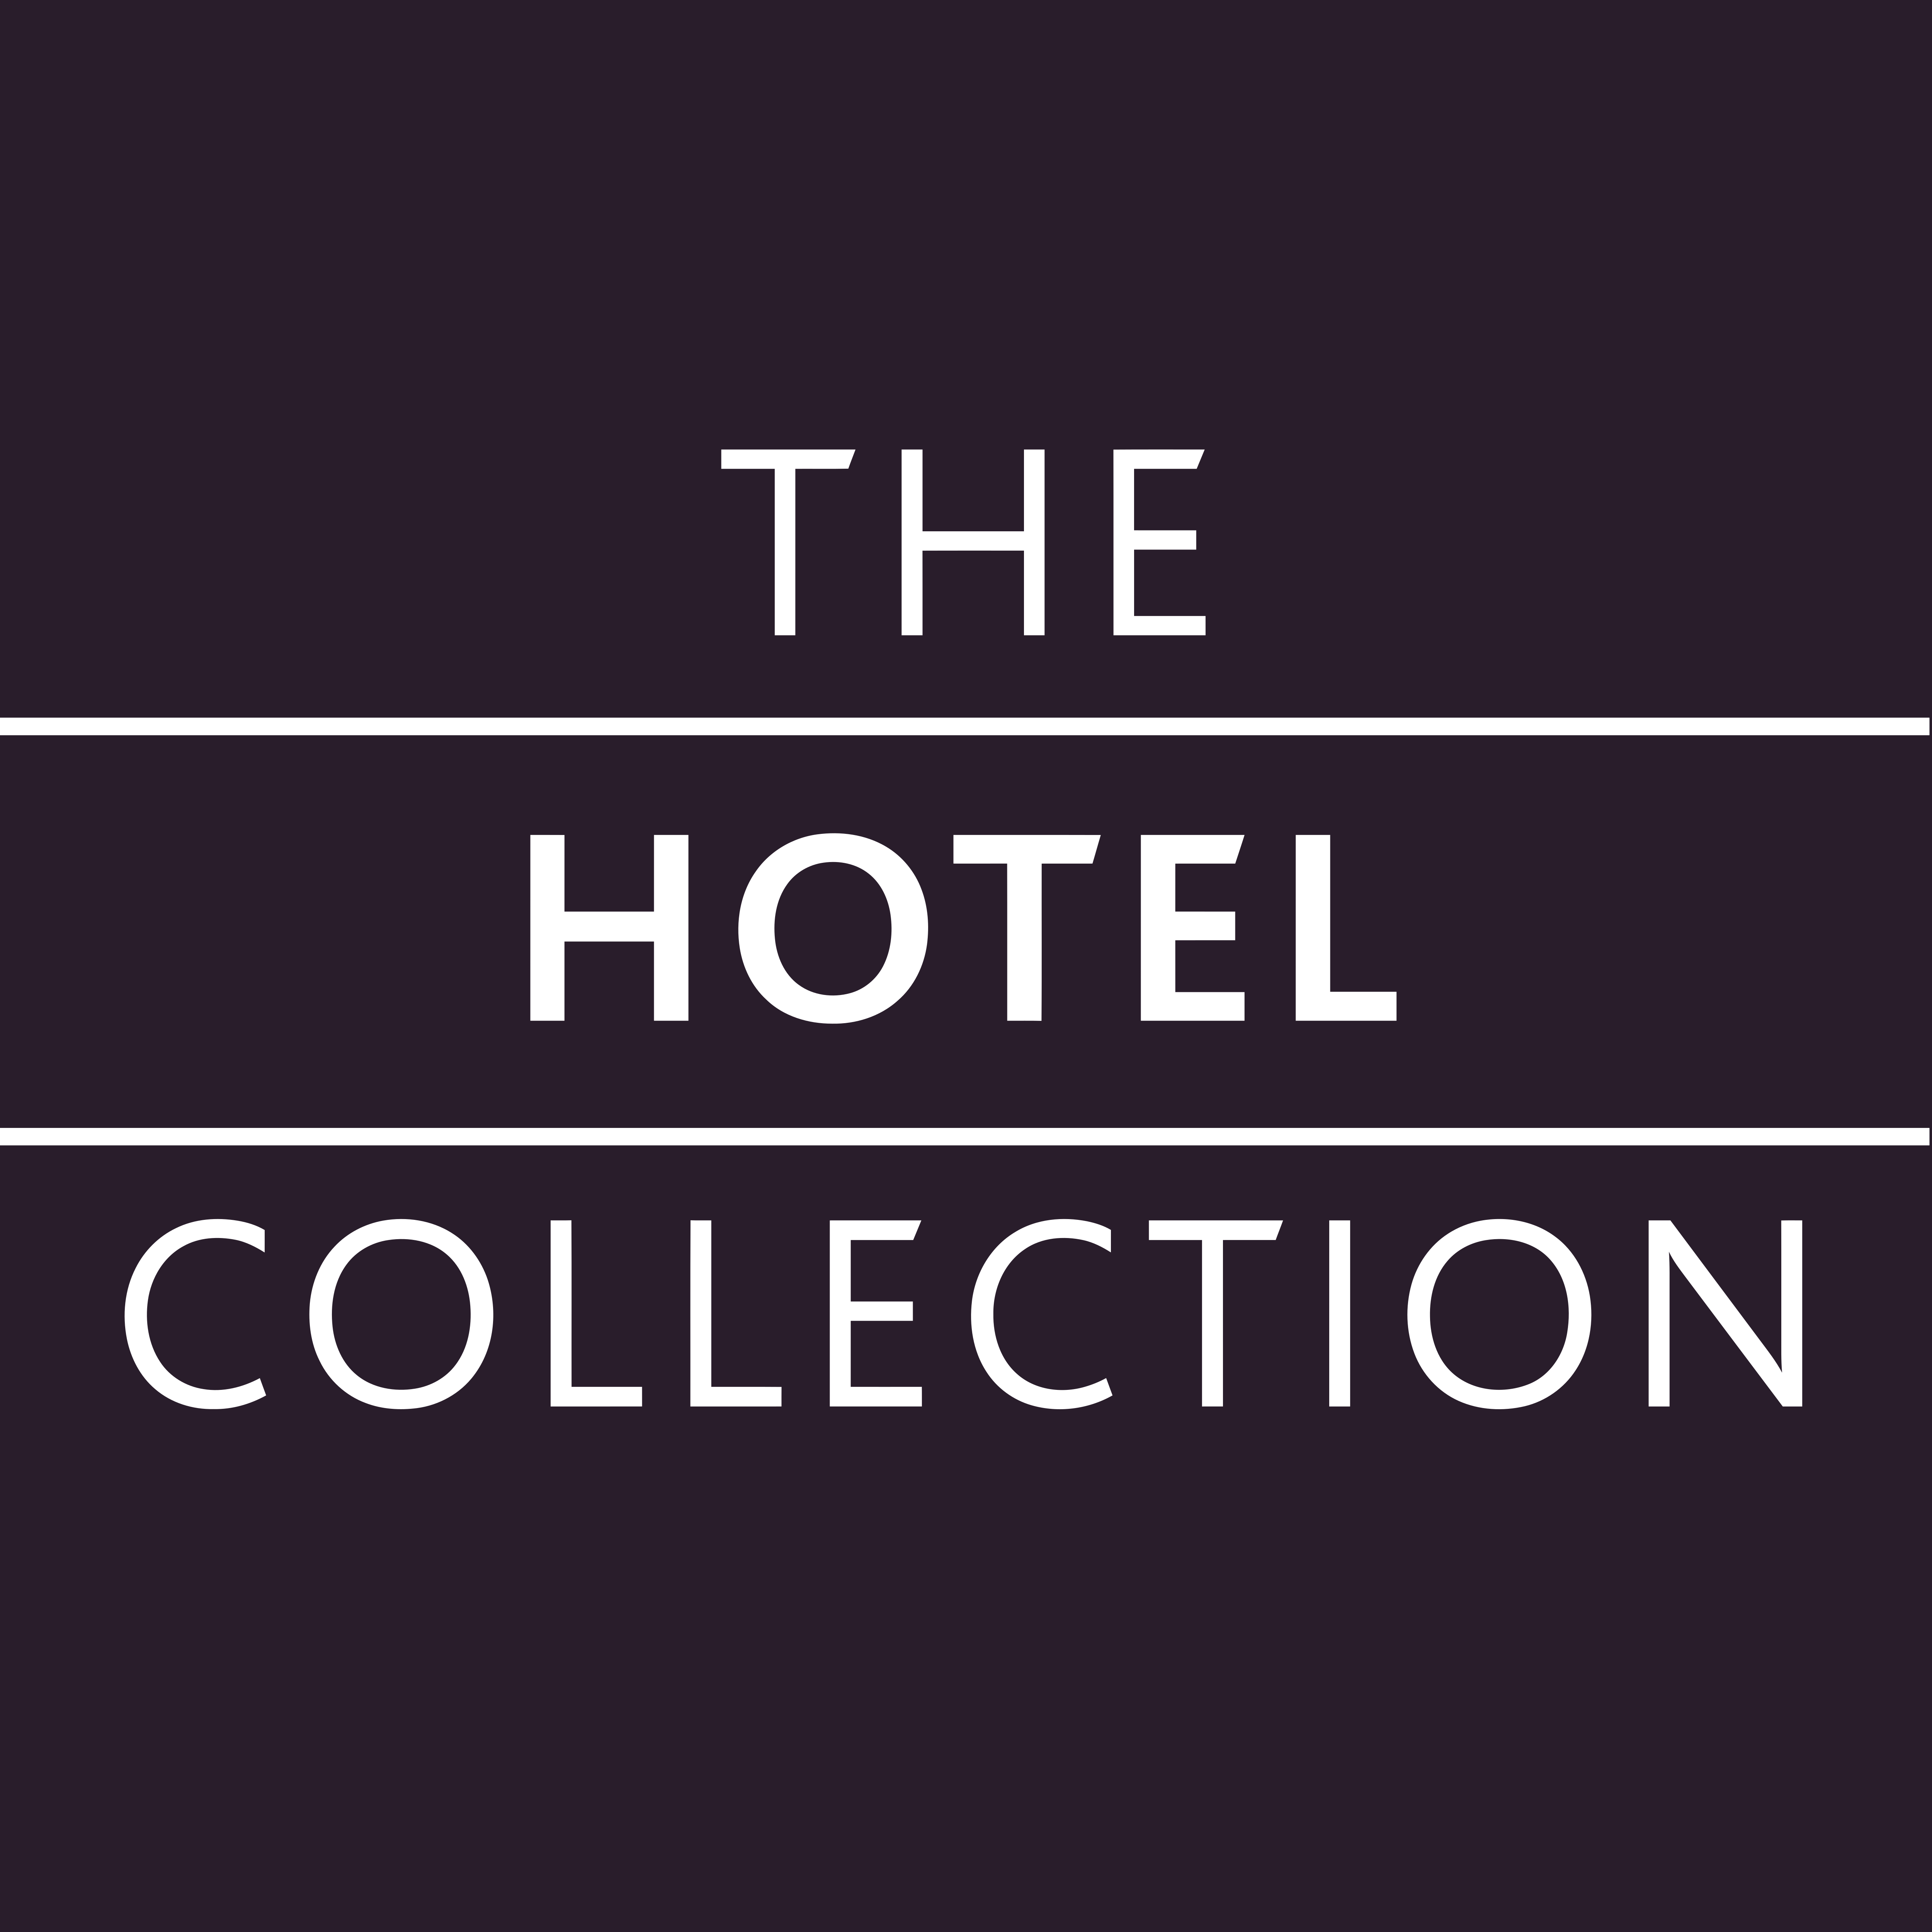 The Hotel Collection – Logos Download